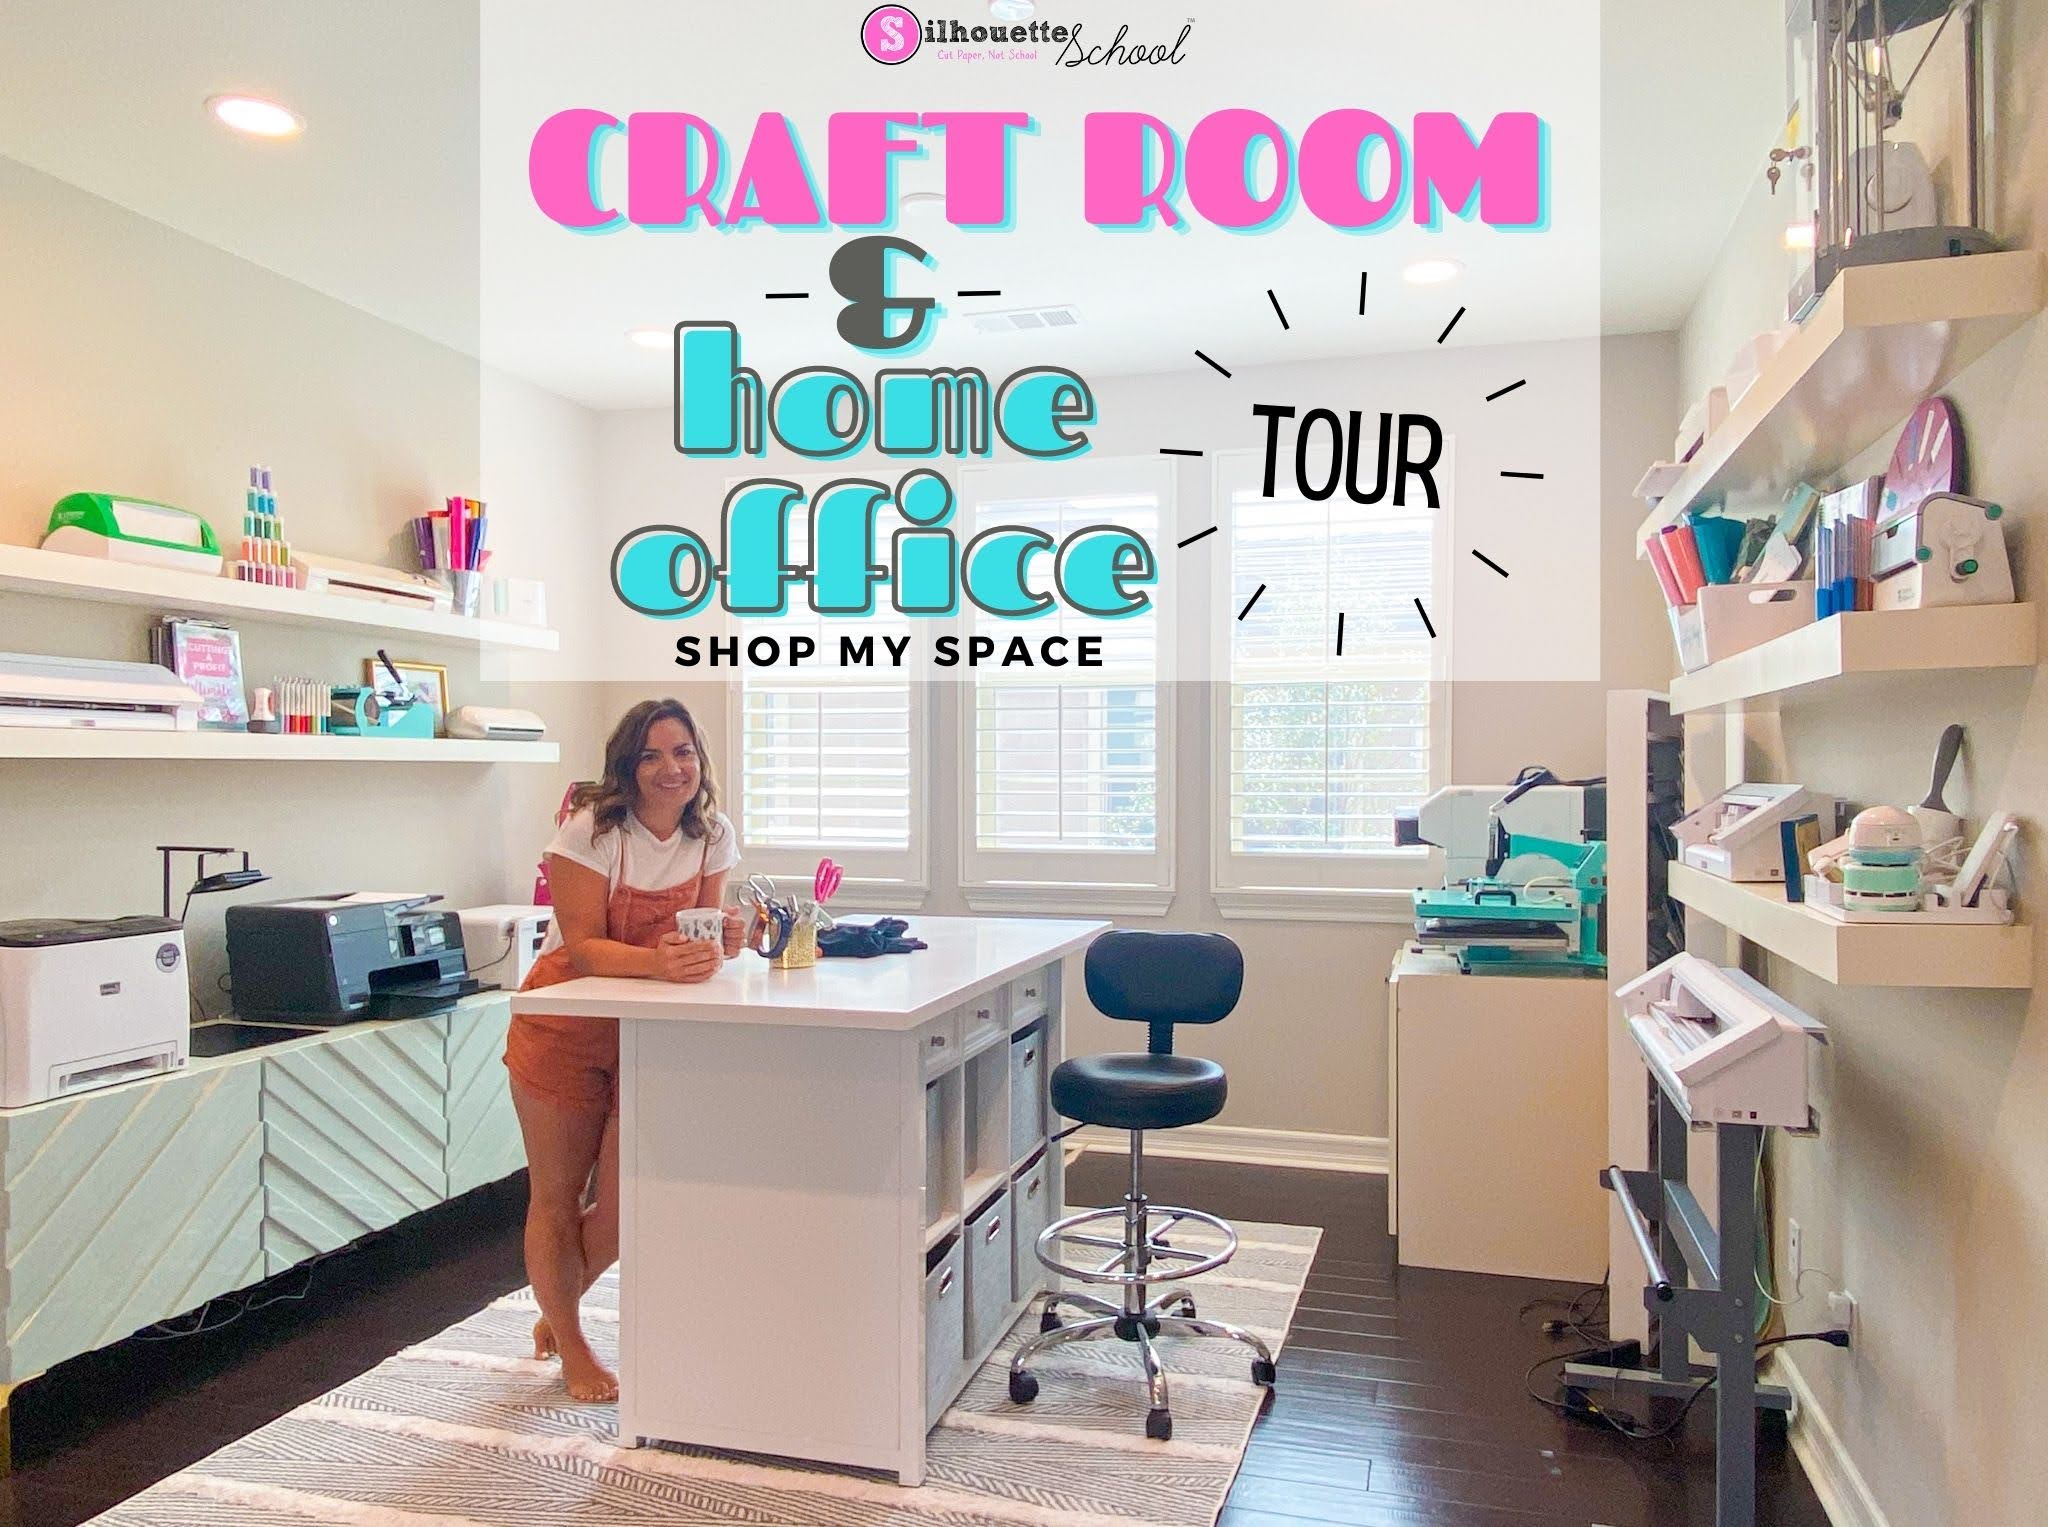 The Best Cricut Setup For Your Office  Office craft room combo, Craft room  office, Office organization at work